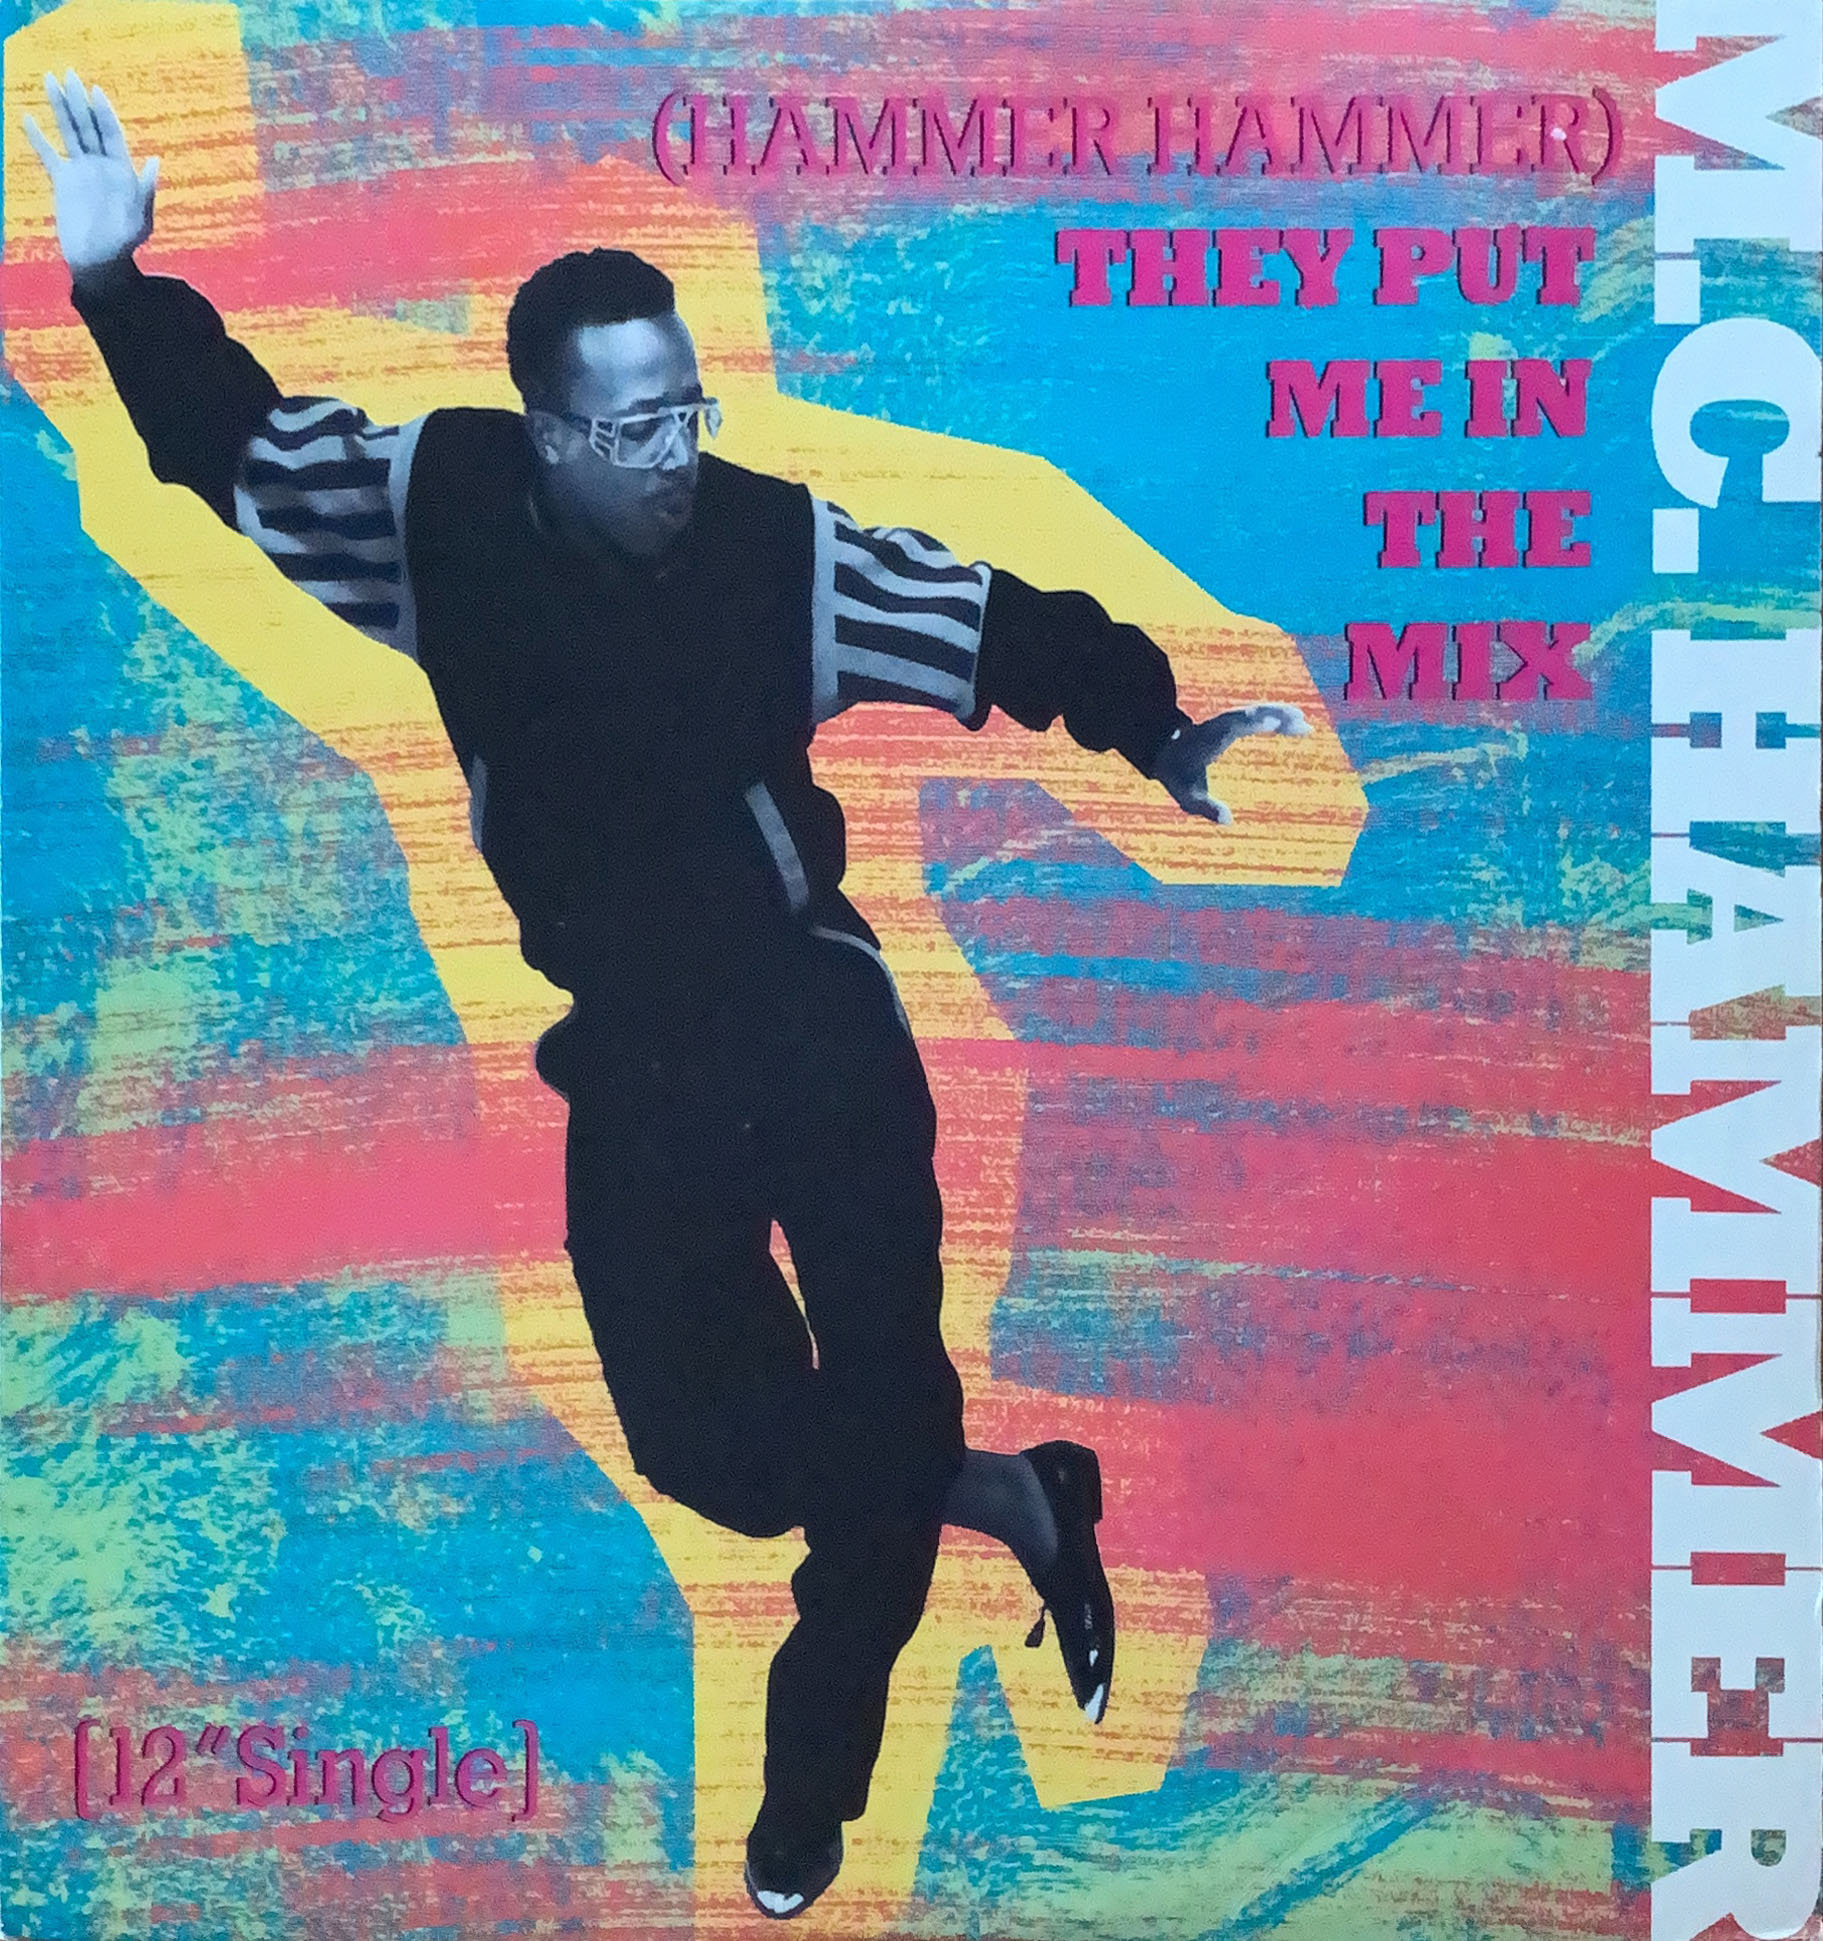 (Hammer Hammer) They Put Me In The Mix [12inch Vinyl]